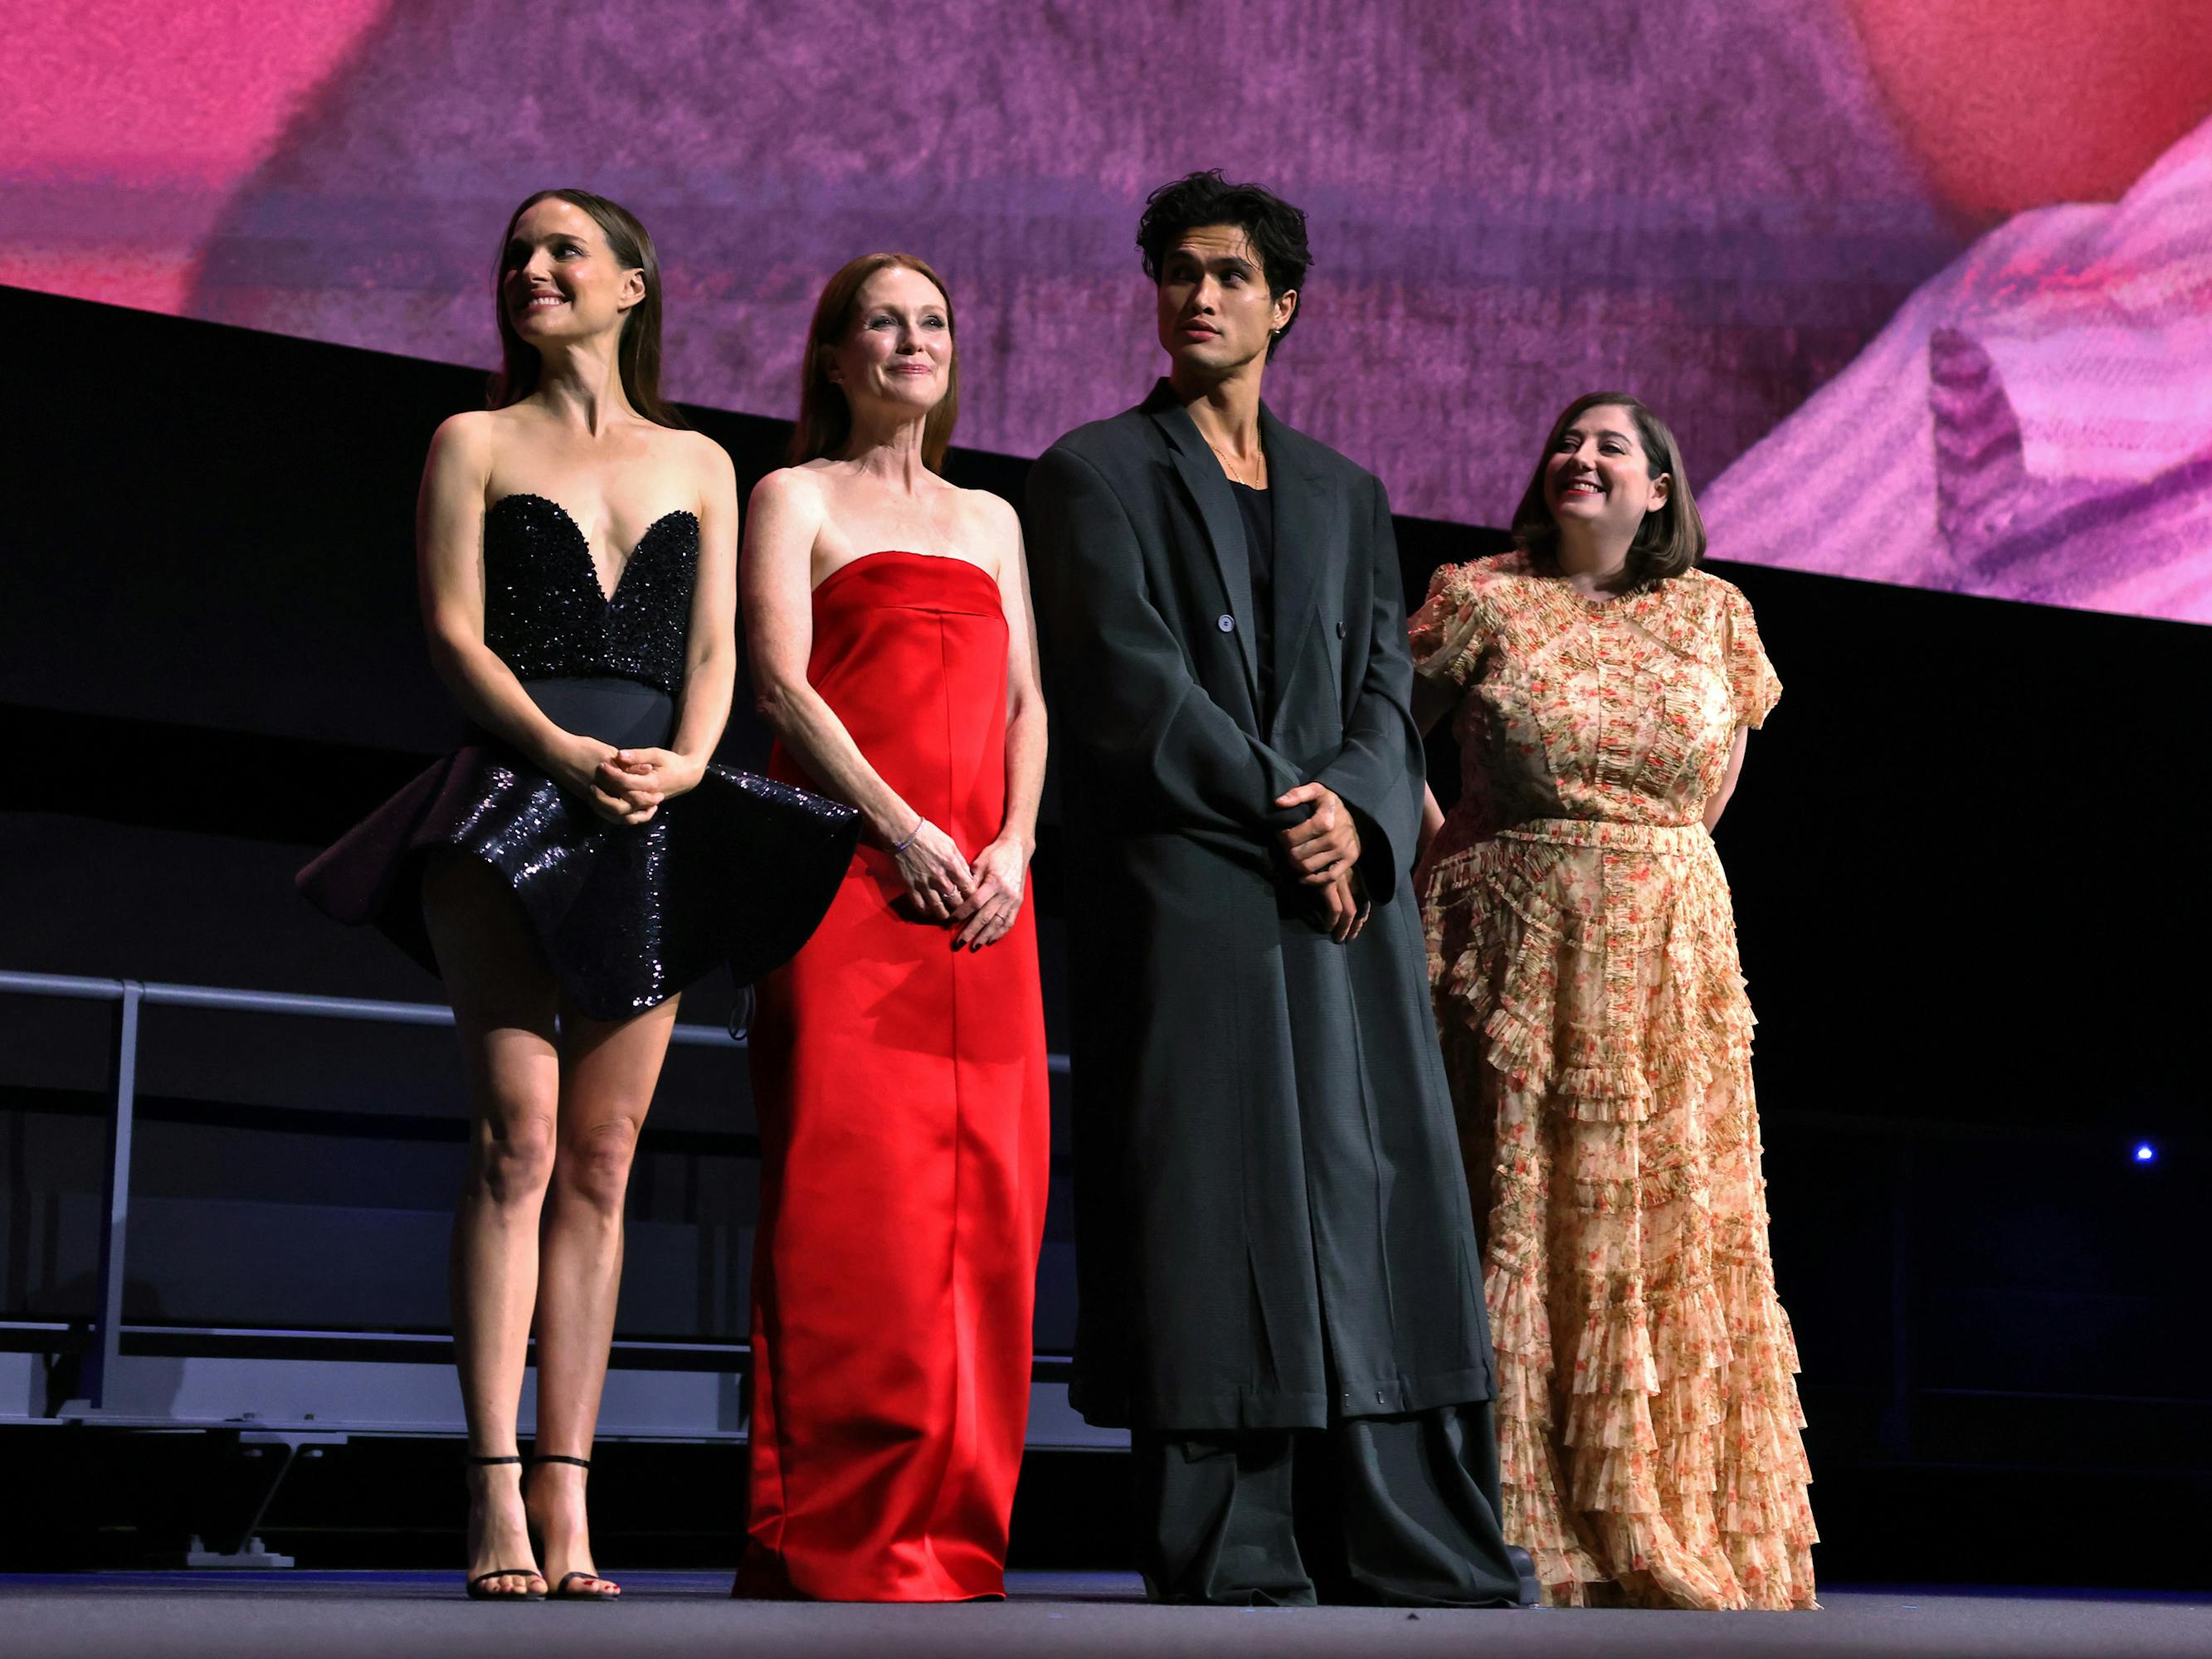 Natalie Portman, Julianne Moore, Charles Melton, and Samy Burch stand on stage.